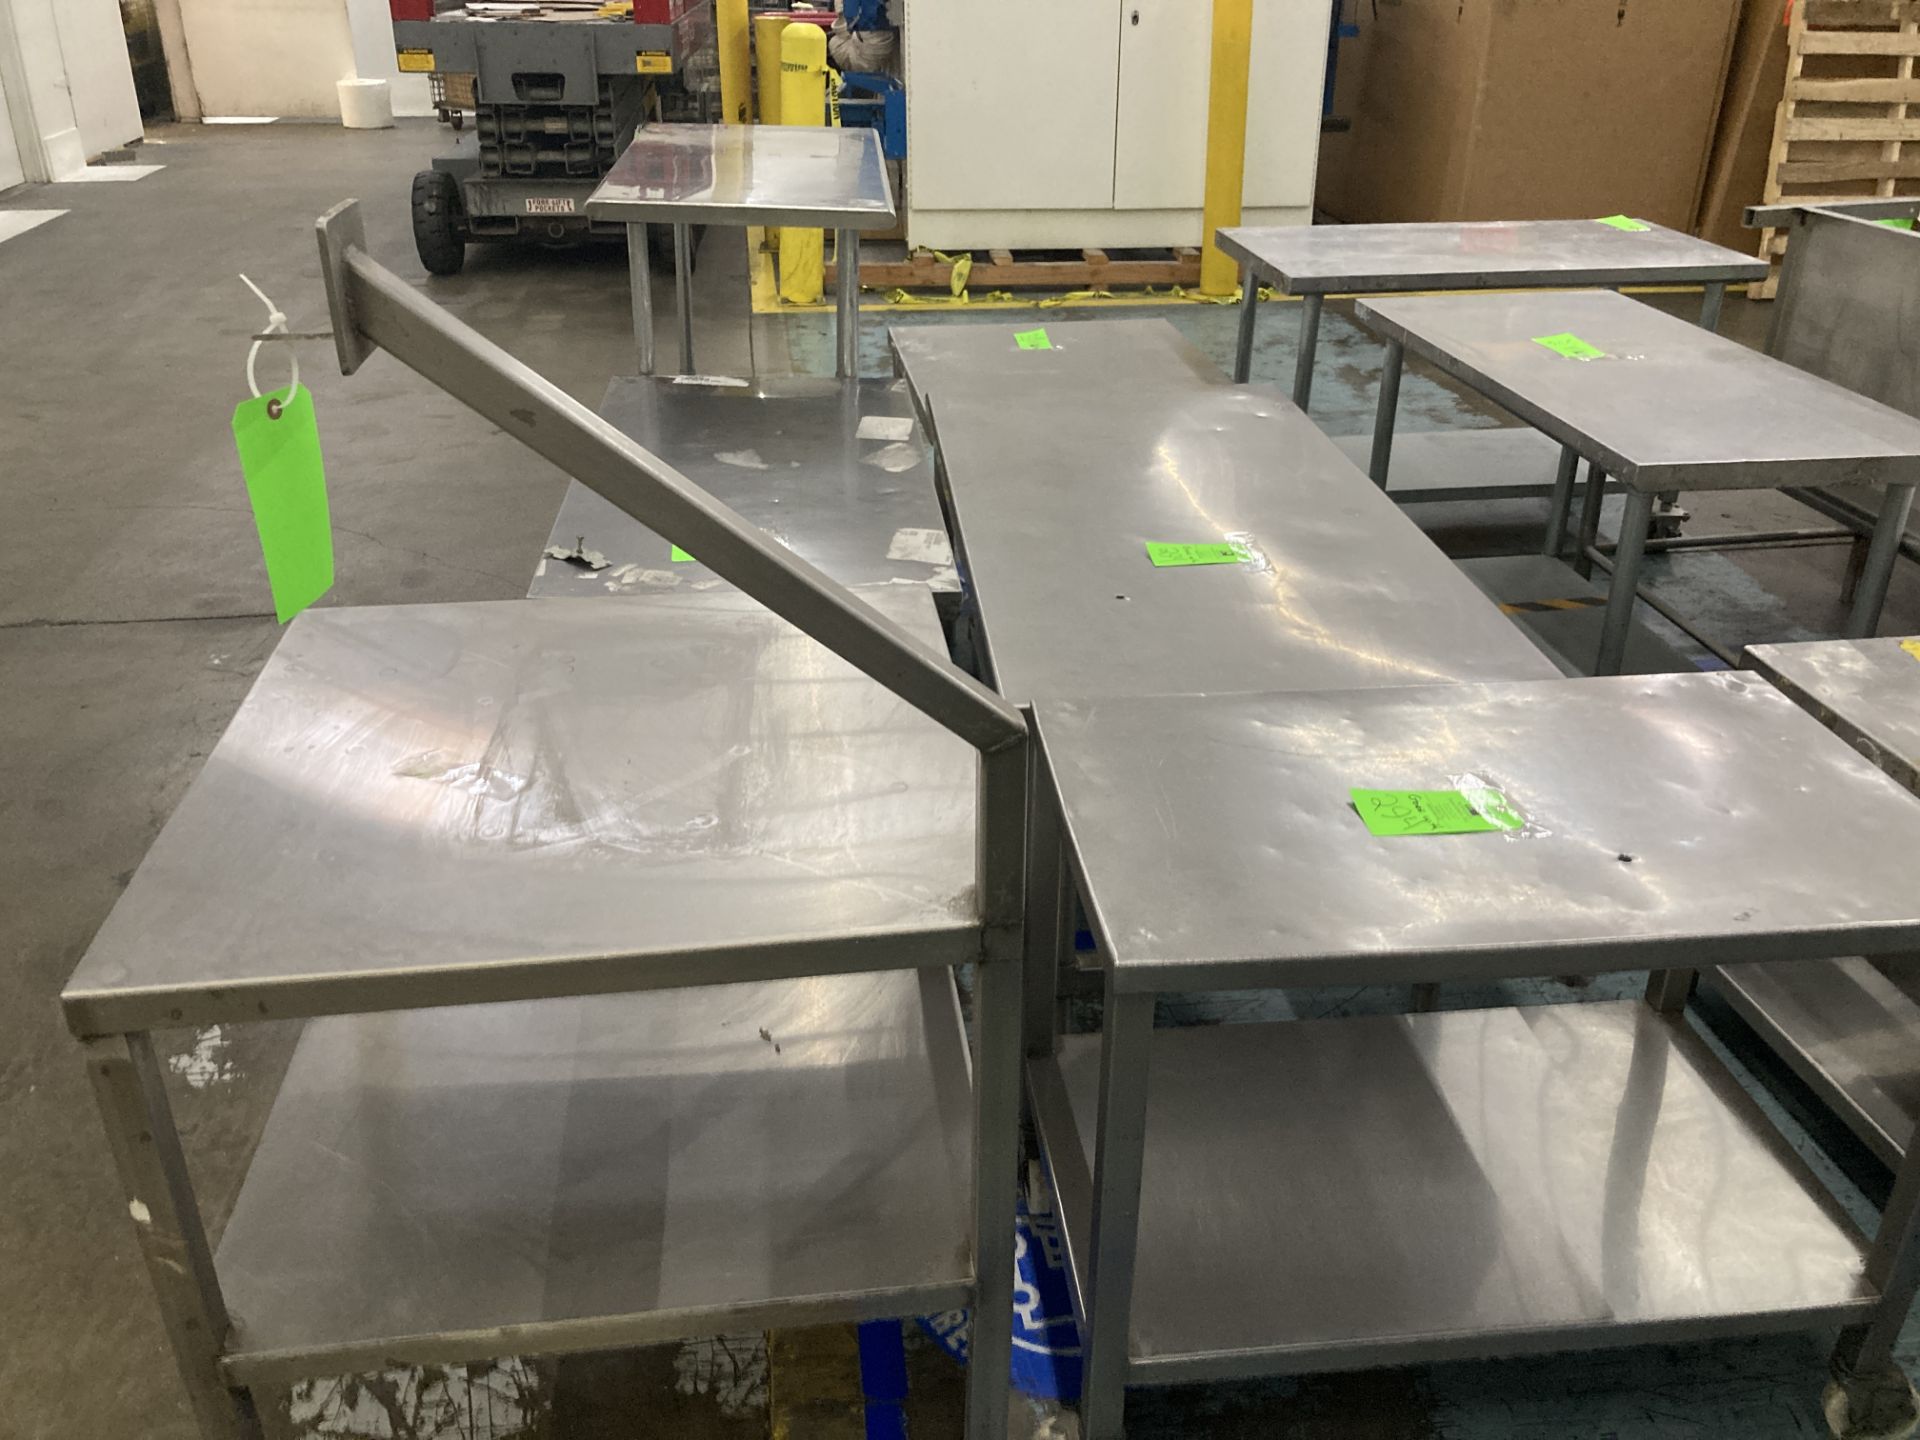 LOT OF 5 stainless steel table, 30 in X 36 X 21 in H, 30 in X 60 in x 24 in h, 30 in x 30 in x 30